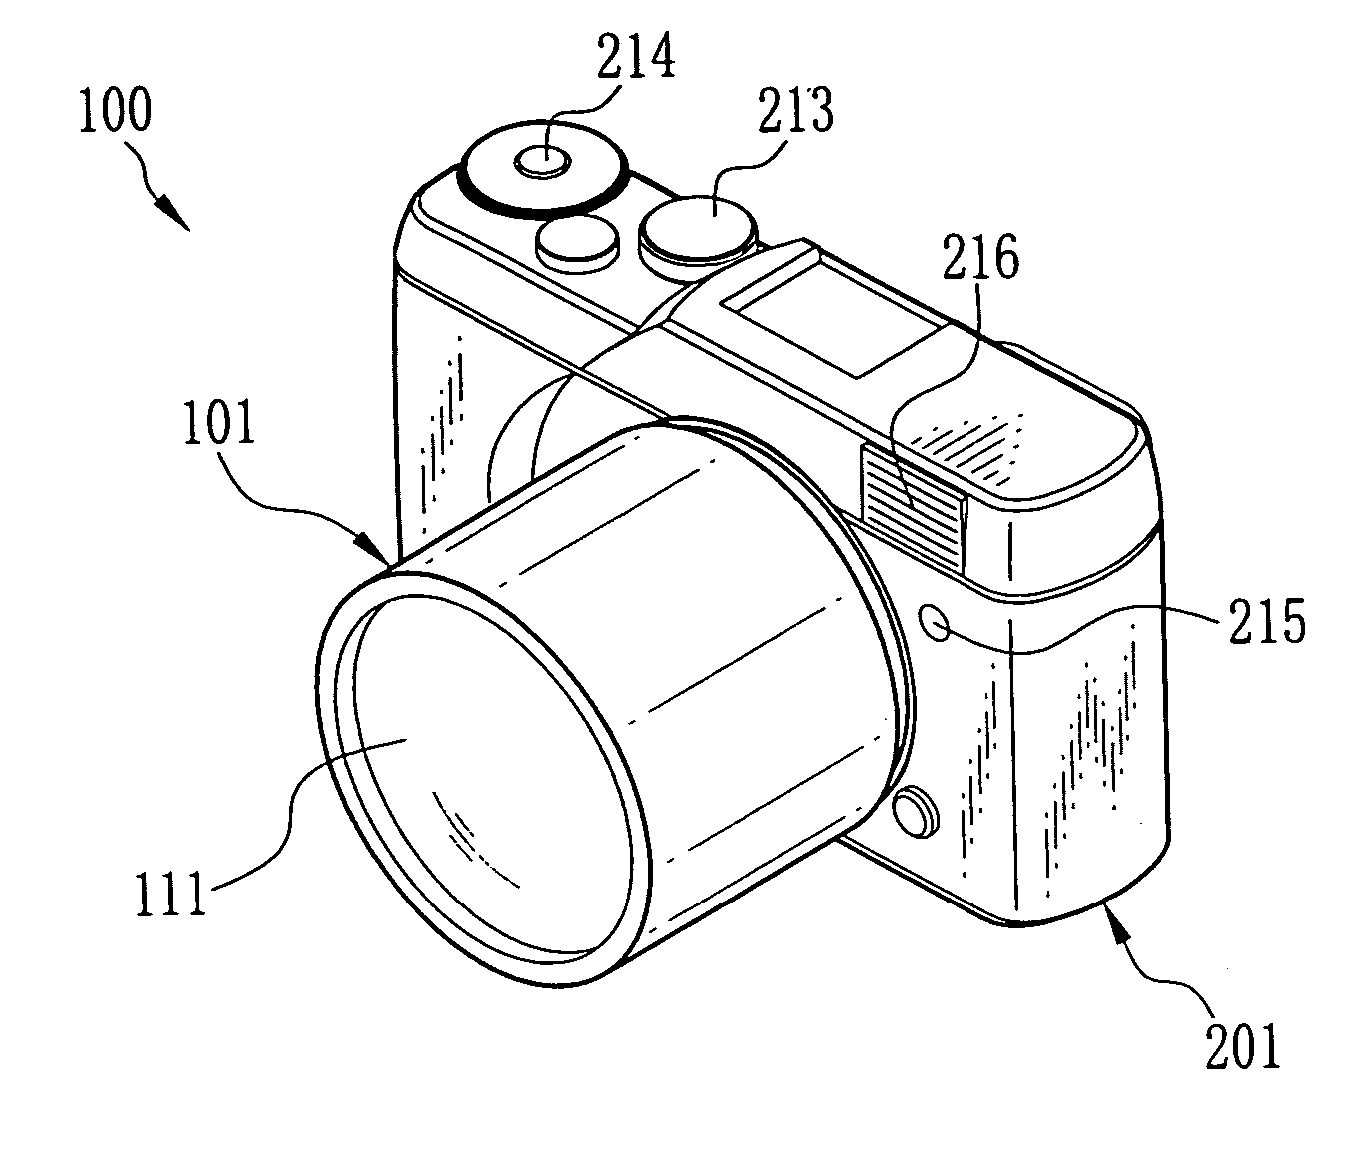 Electronics device system and electronics device